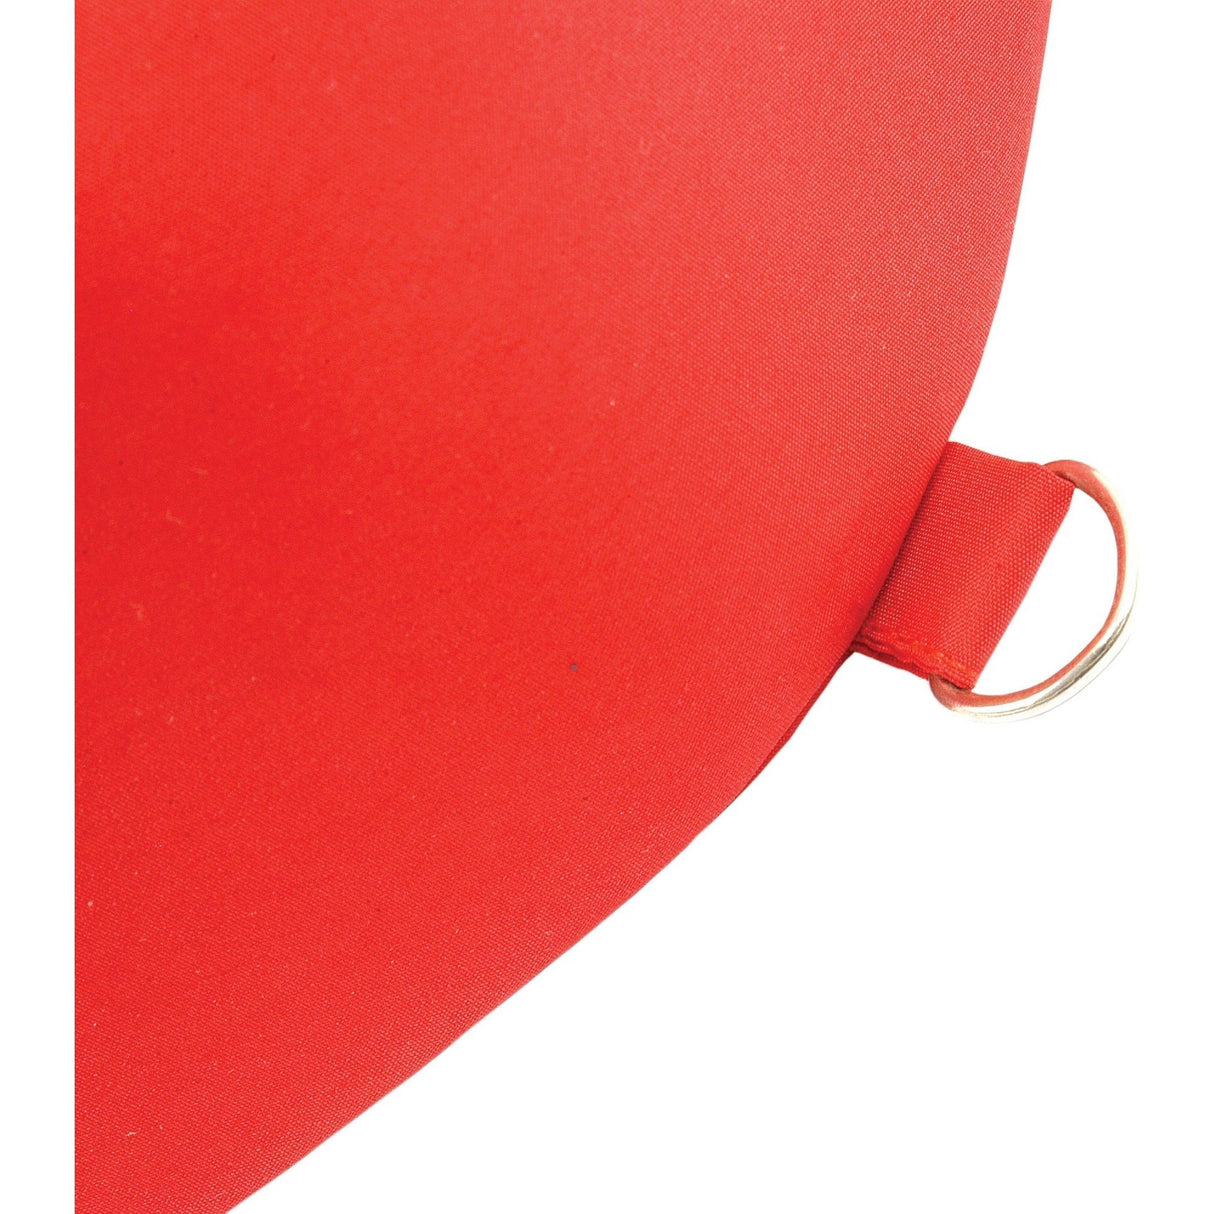 Seat Cushion - Red
 - S.670 - Massey Tractor Parts